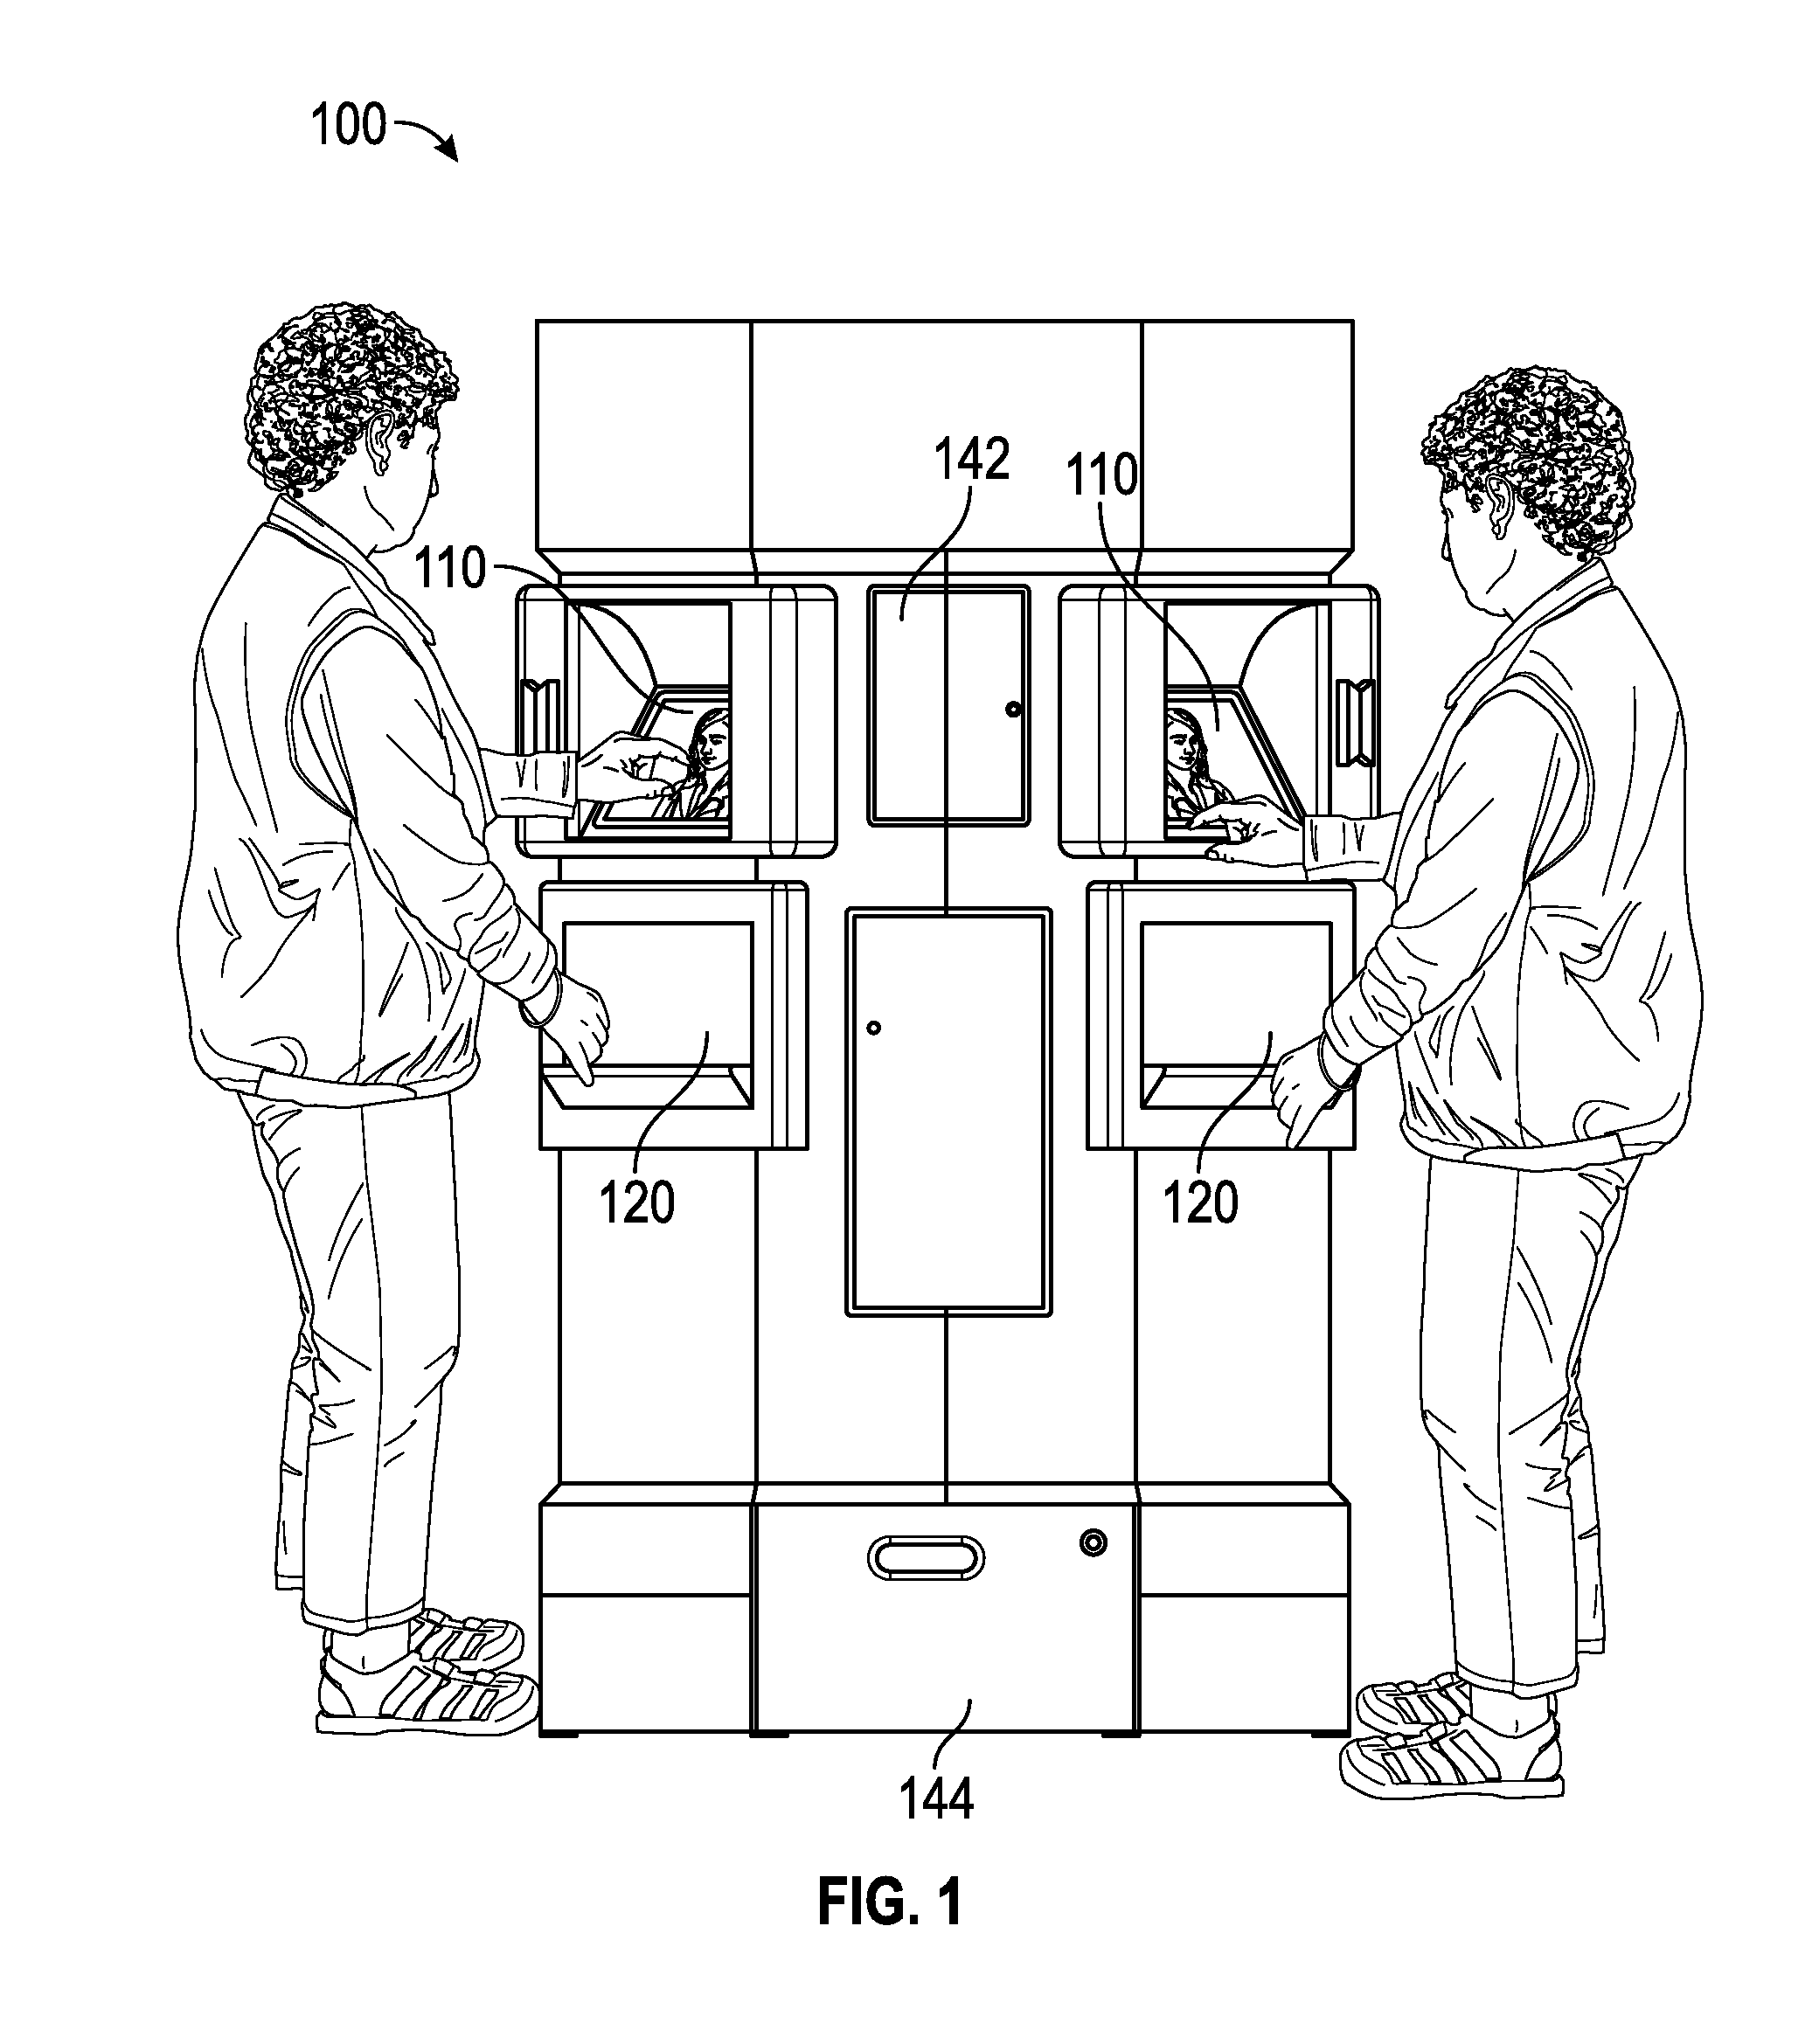 Systems and methods for dispensing prescription medication using a medication dispensing machine